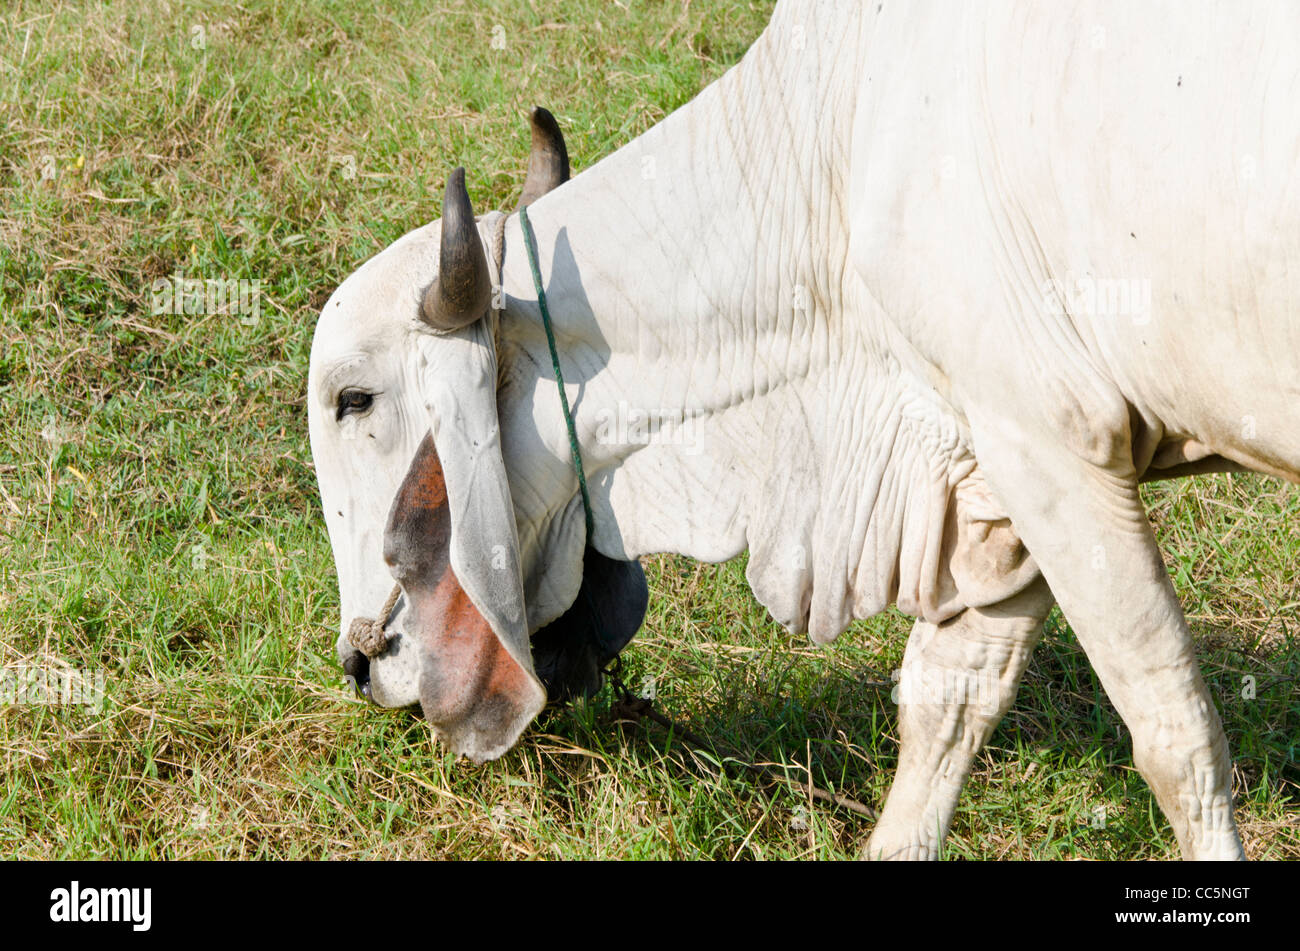 A large white Brahman cow with curved horns and large floppy ears grazing in a field in northern Thailand Stock Photo